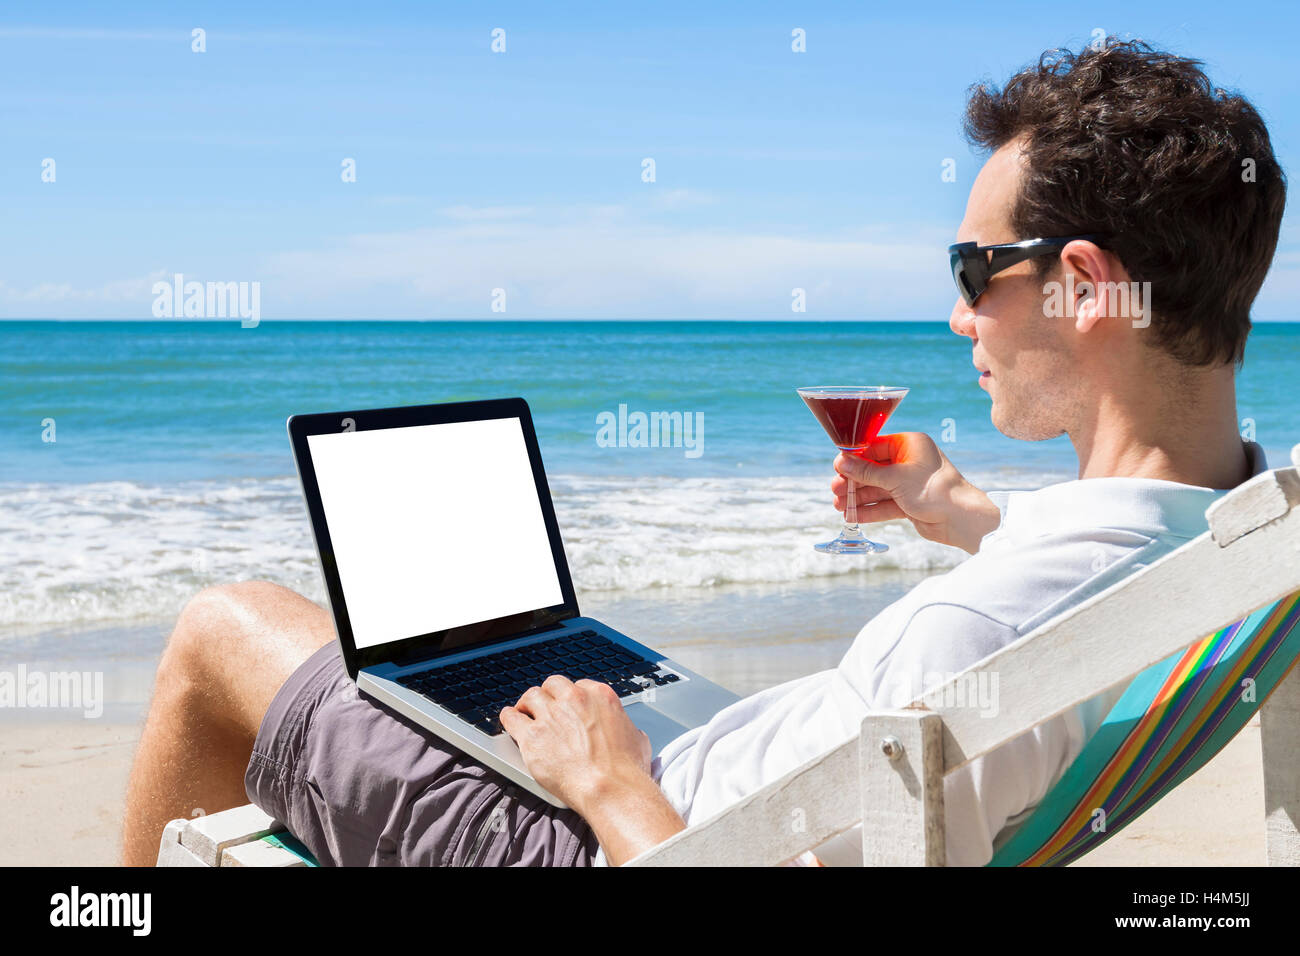 https://c8.alamy.com/comp/H4M5JJ/independent-freelancer-writing-emails-on-tropical-beach-with-a-cocktail-H4M5JJ.jpg